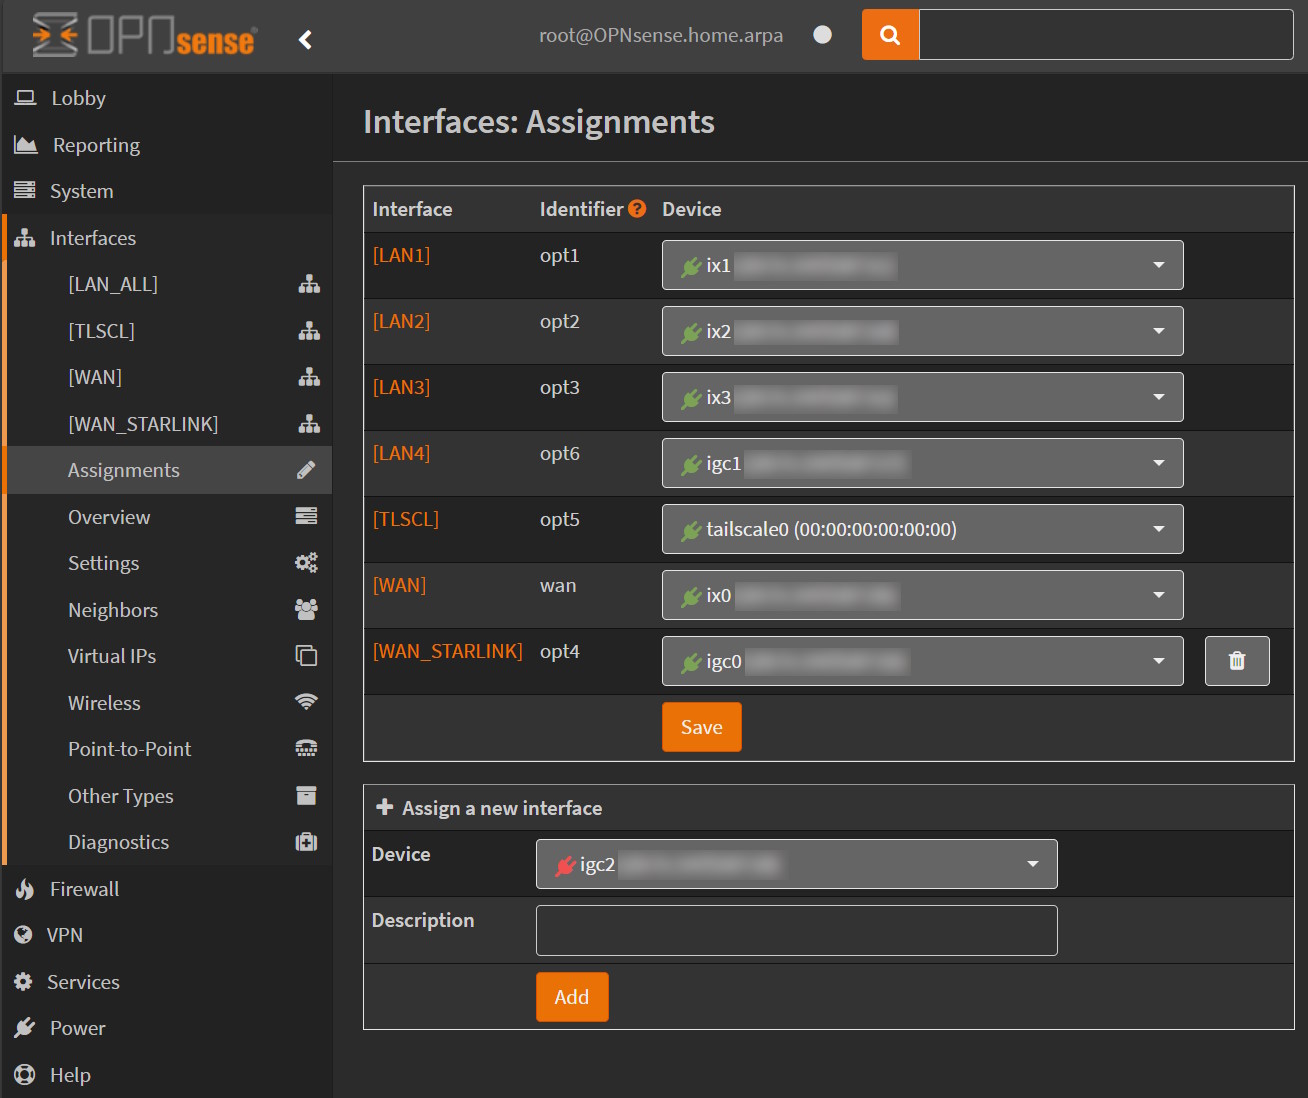 OPNsense Interfaces / Assignments